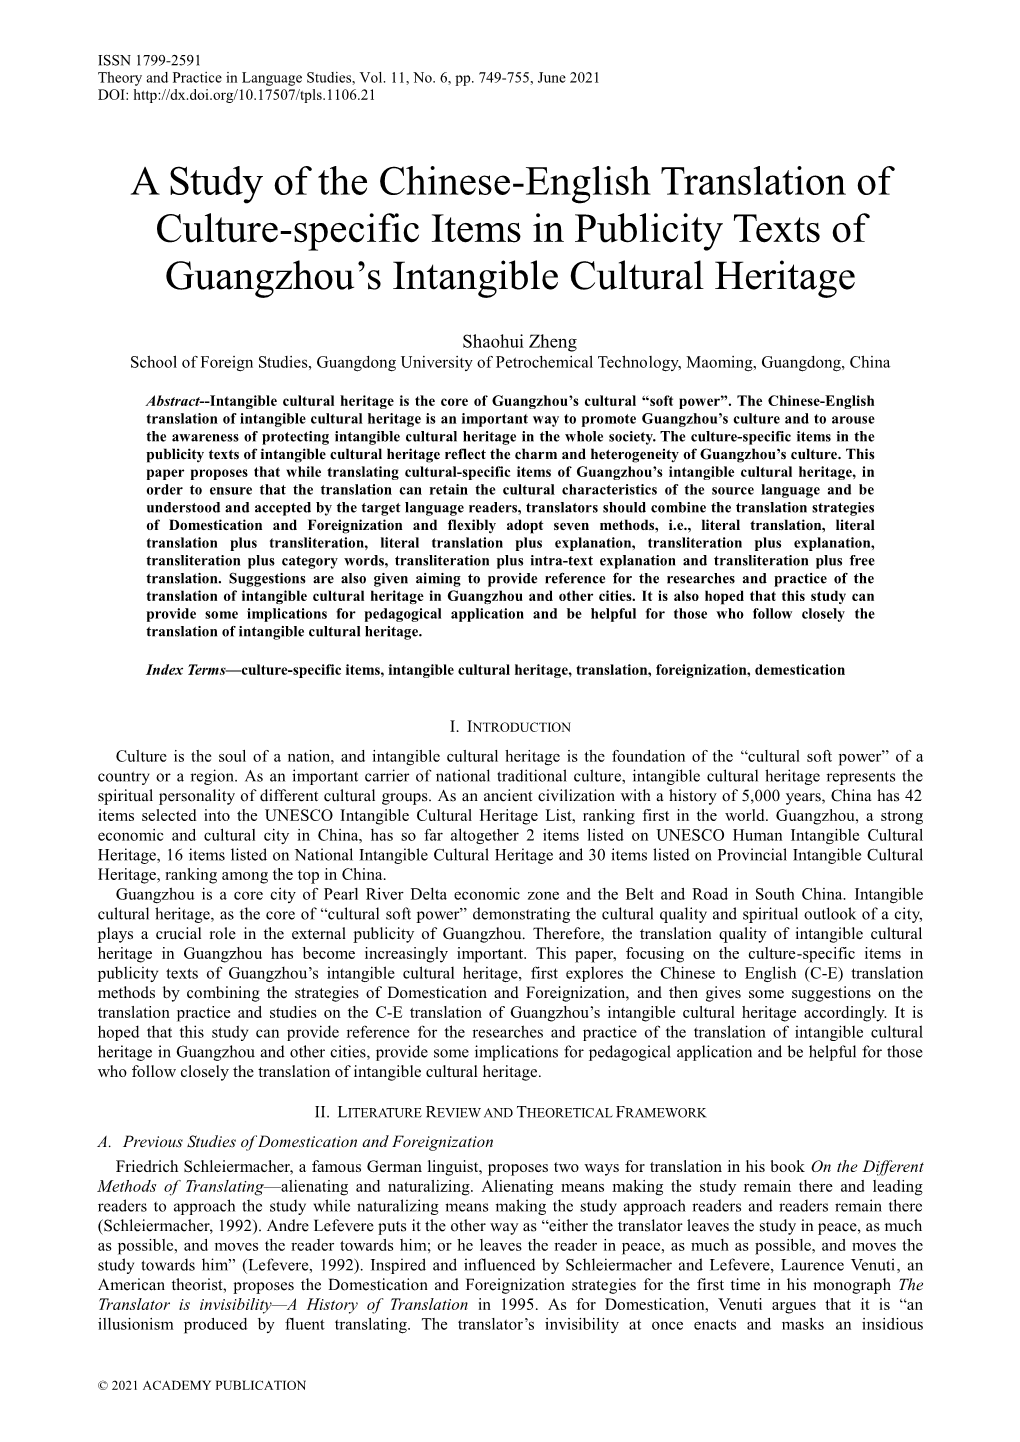 A Study of the Chinese-English Translation of Culture-Specific Items in Publicity Texts of Guangzhou’S Intangible Cultural Heritage